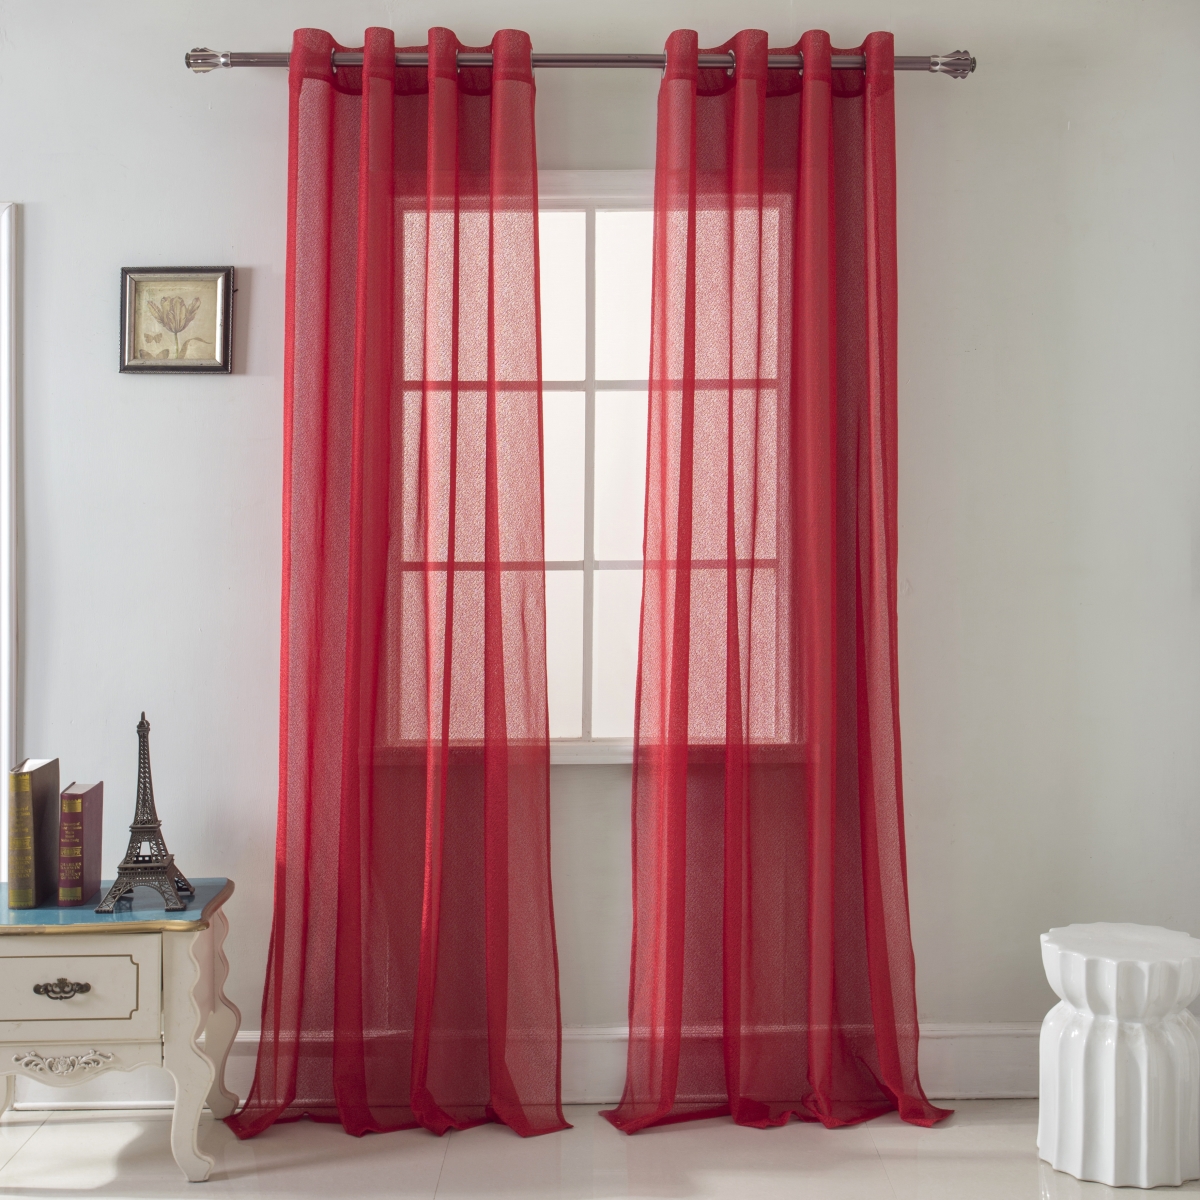 Pns15977 54 X 90 In. Spyder Lace Grommet Single Curtain Panel, Red